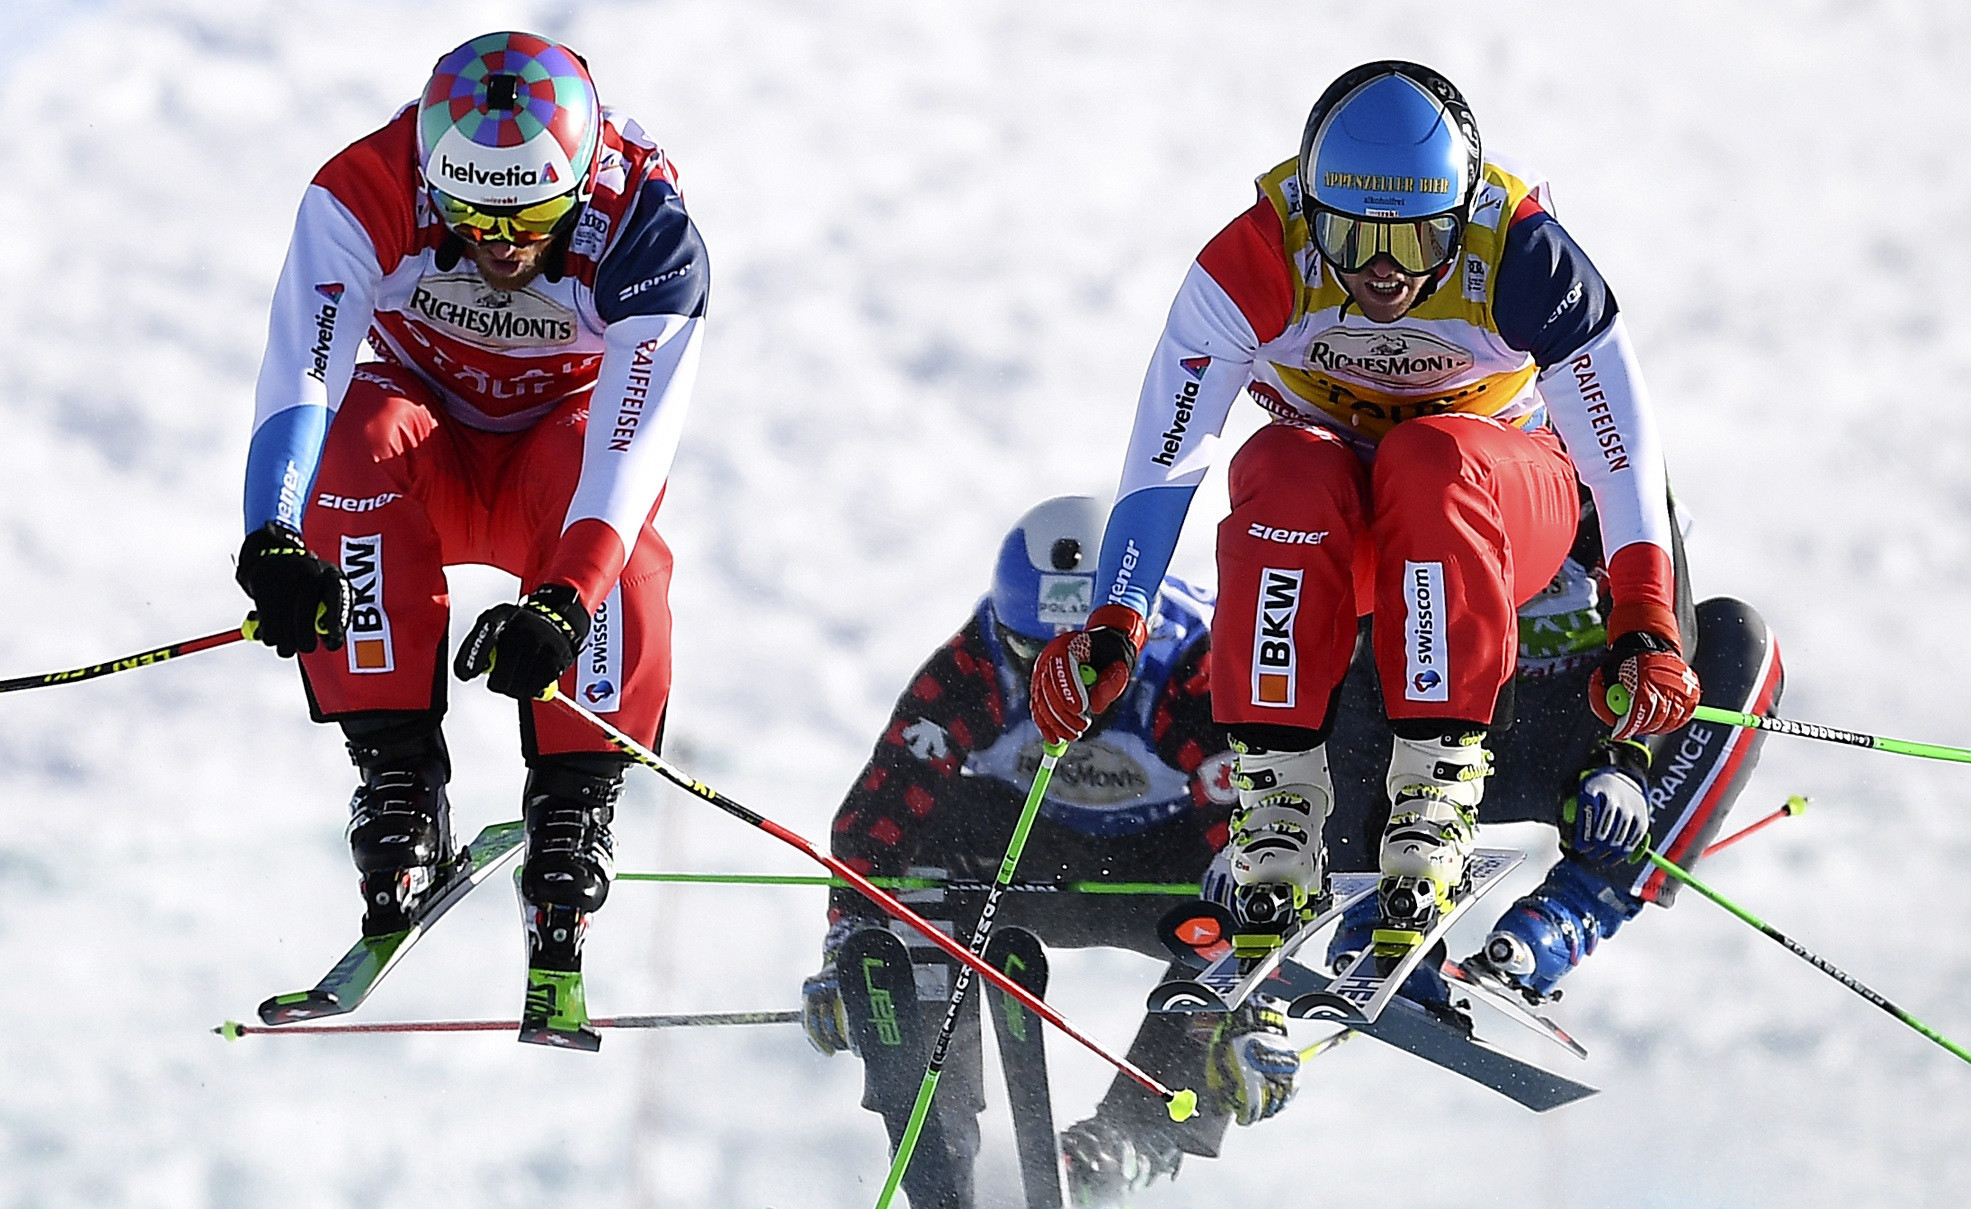 Switzerland’s Marc Bischofberger, left, has extended his lead in the FIS Ski Cross World Cup standings after making it two wins in as many days in Innichen ©Getty Images